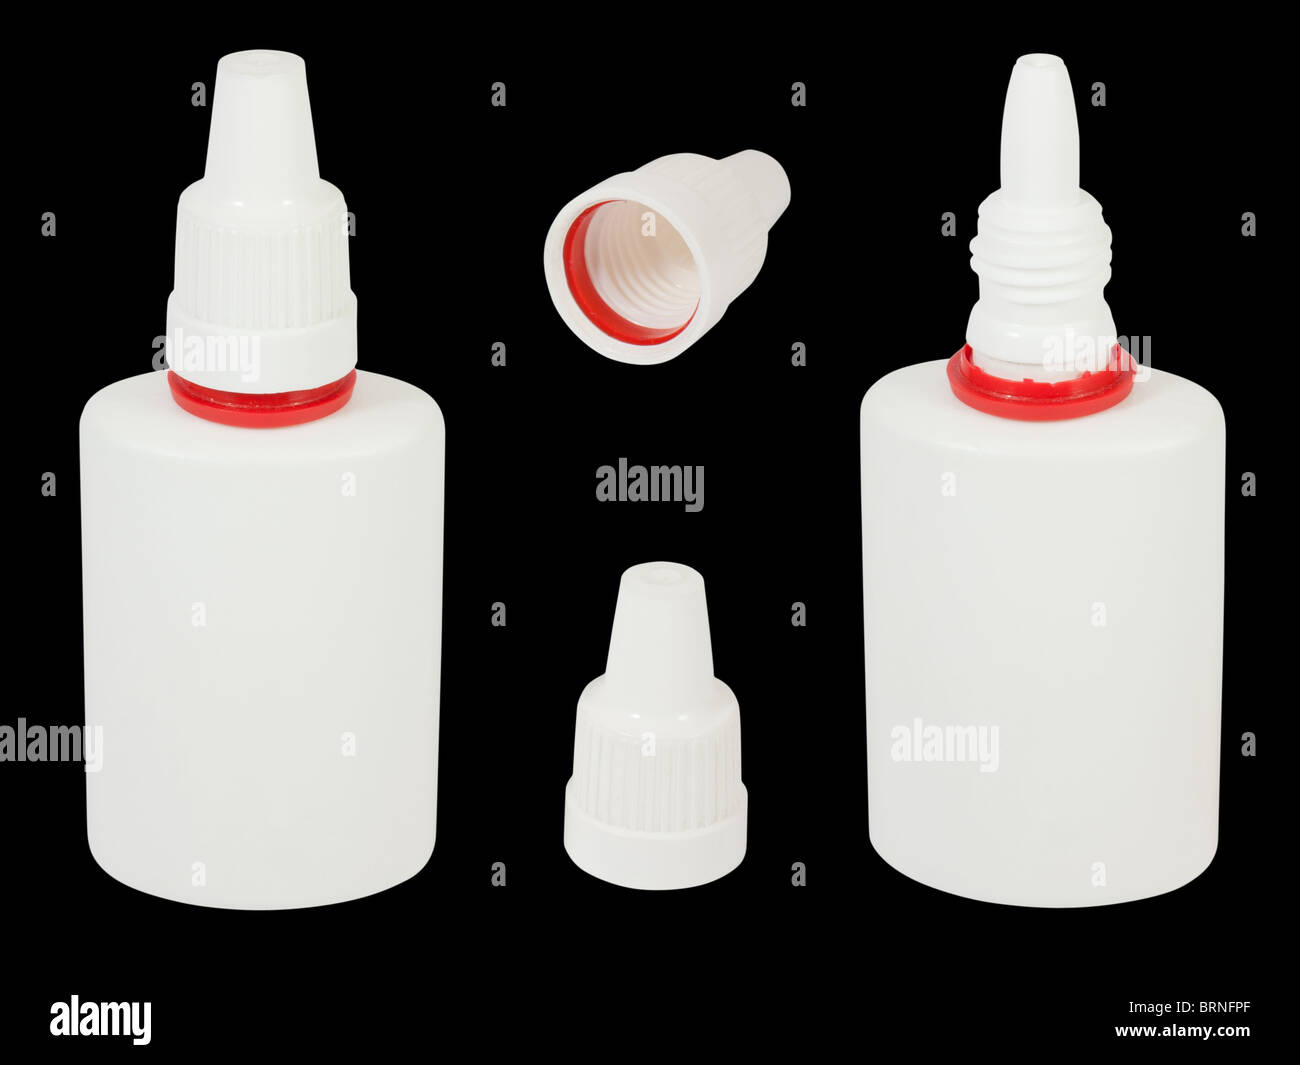 Nasal spray with place for logo and text. Isolated on black background with clipping path. Stock Photo